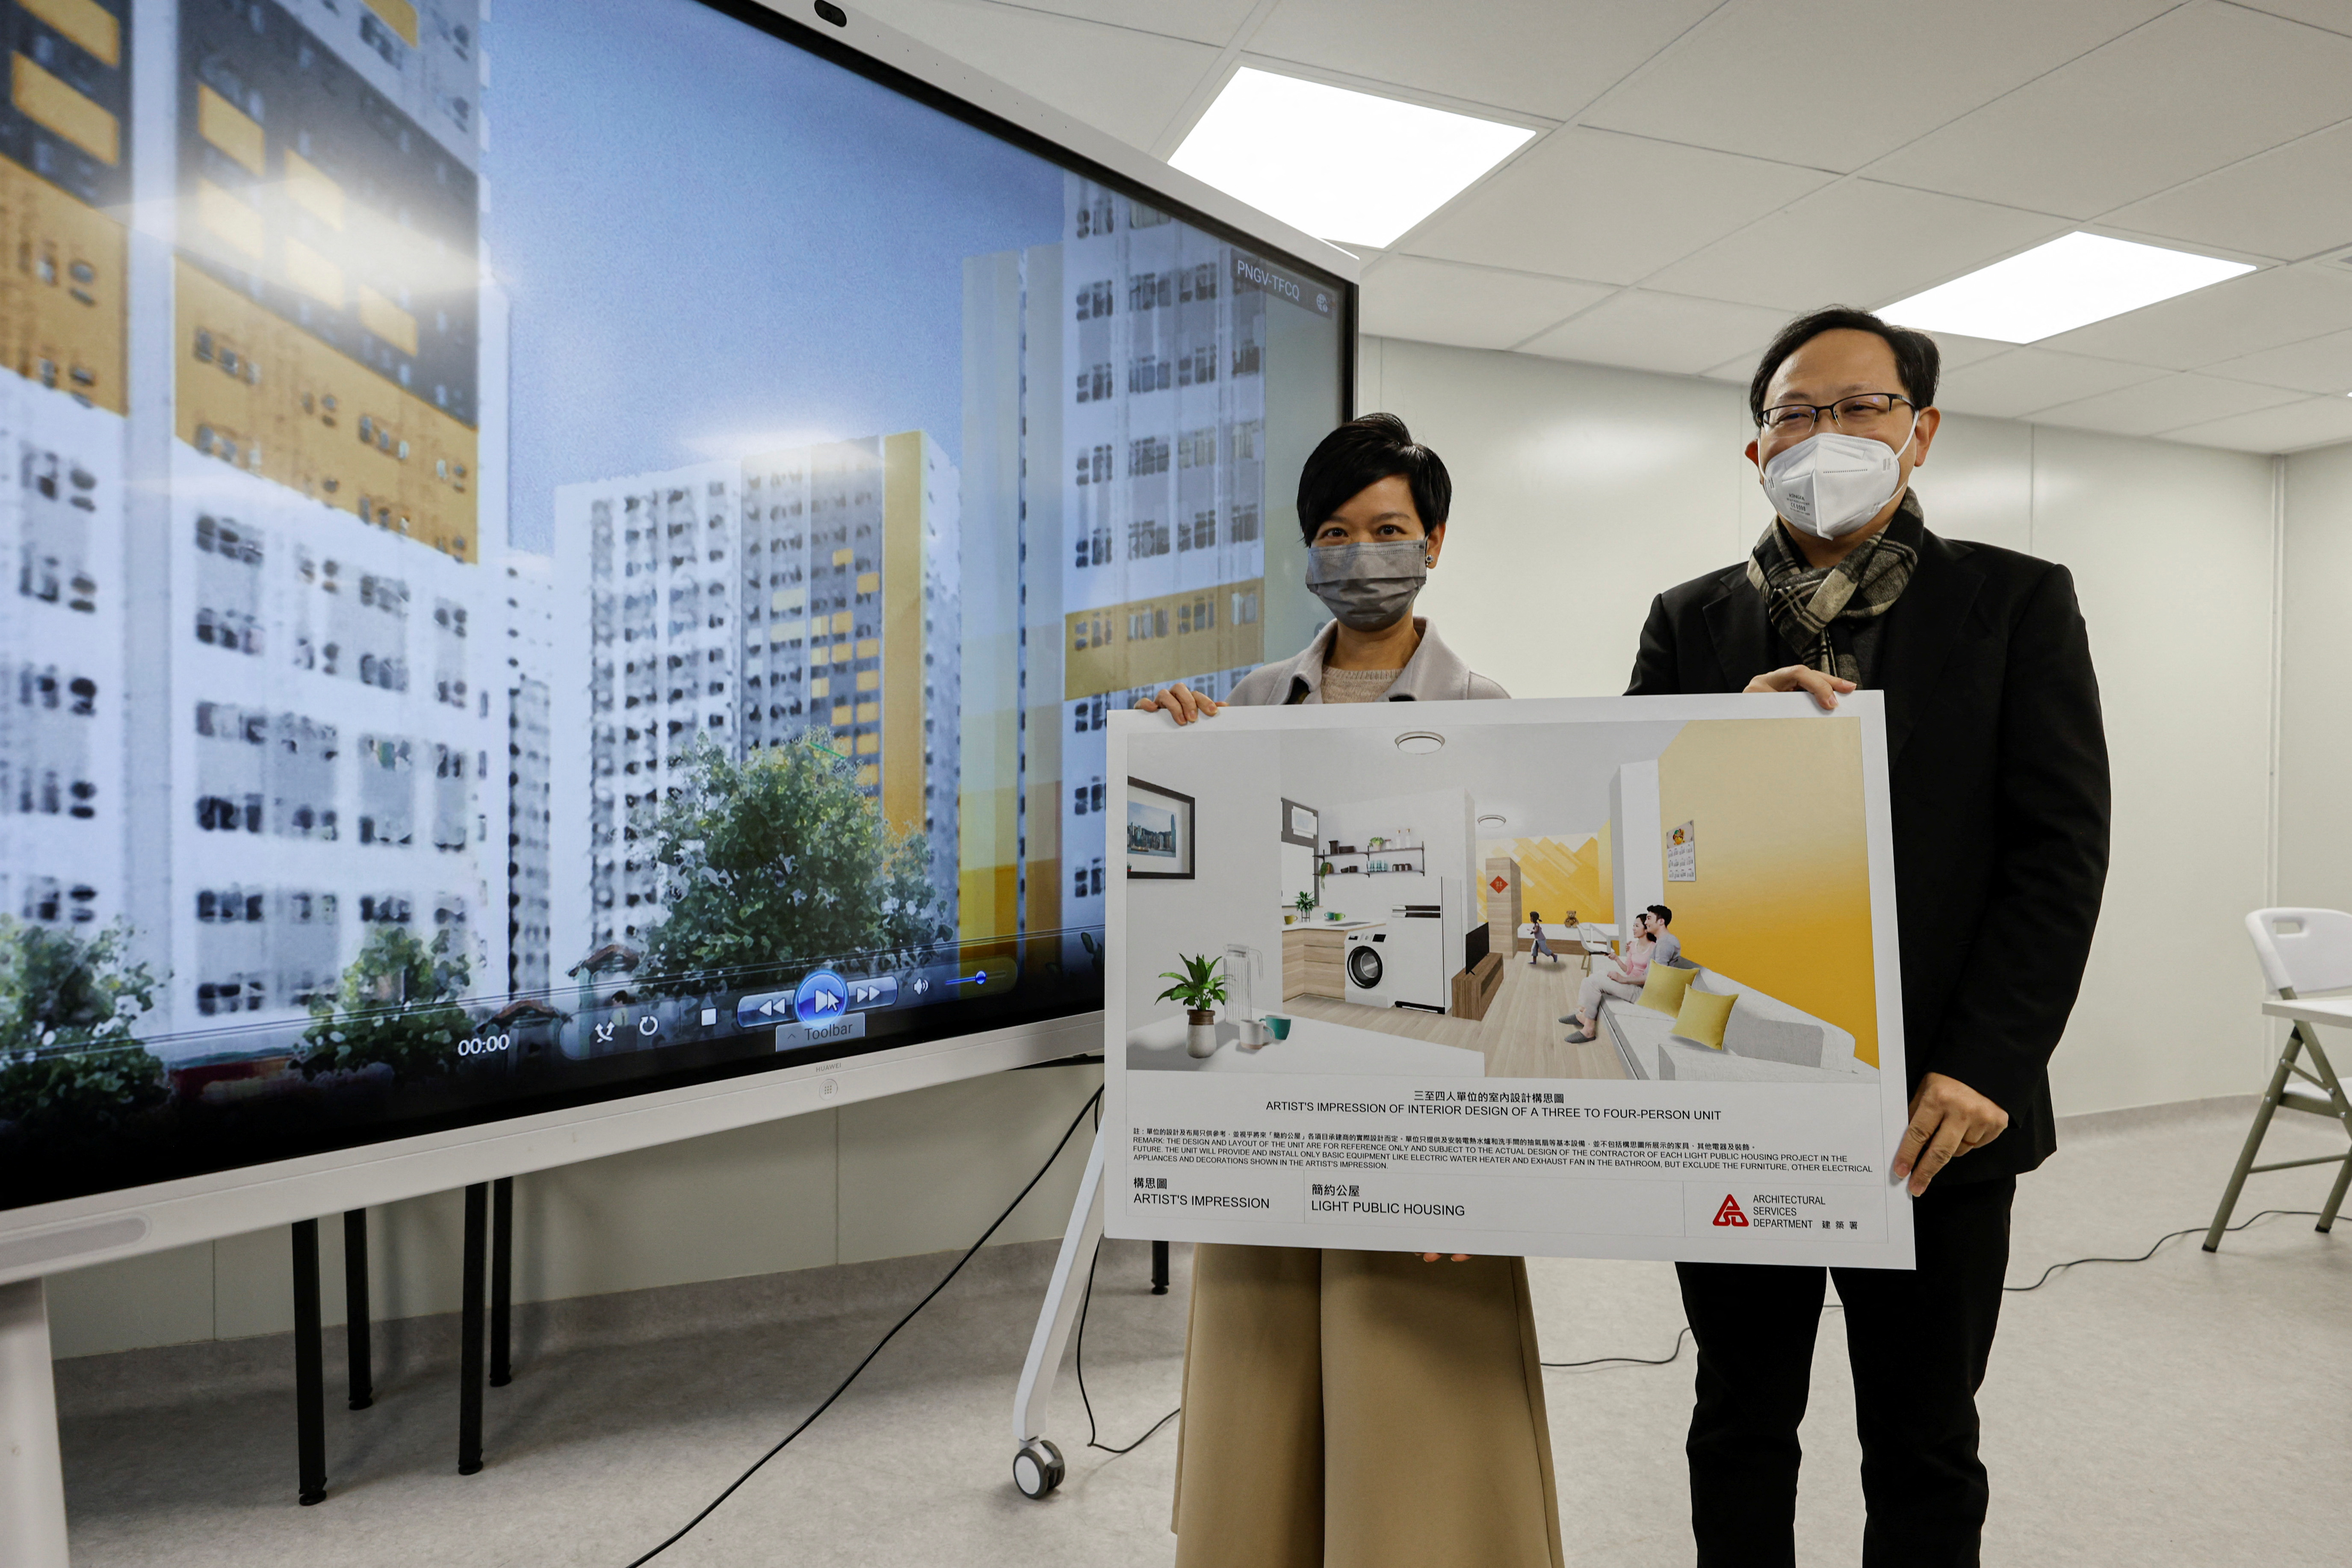 Secretary for Housing Winnie Ho Wing-yin and Project Manager of the Architectural Services Department Edward Wong pose for photos before a news conference in Hong Kong